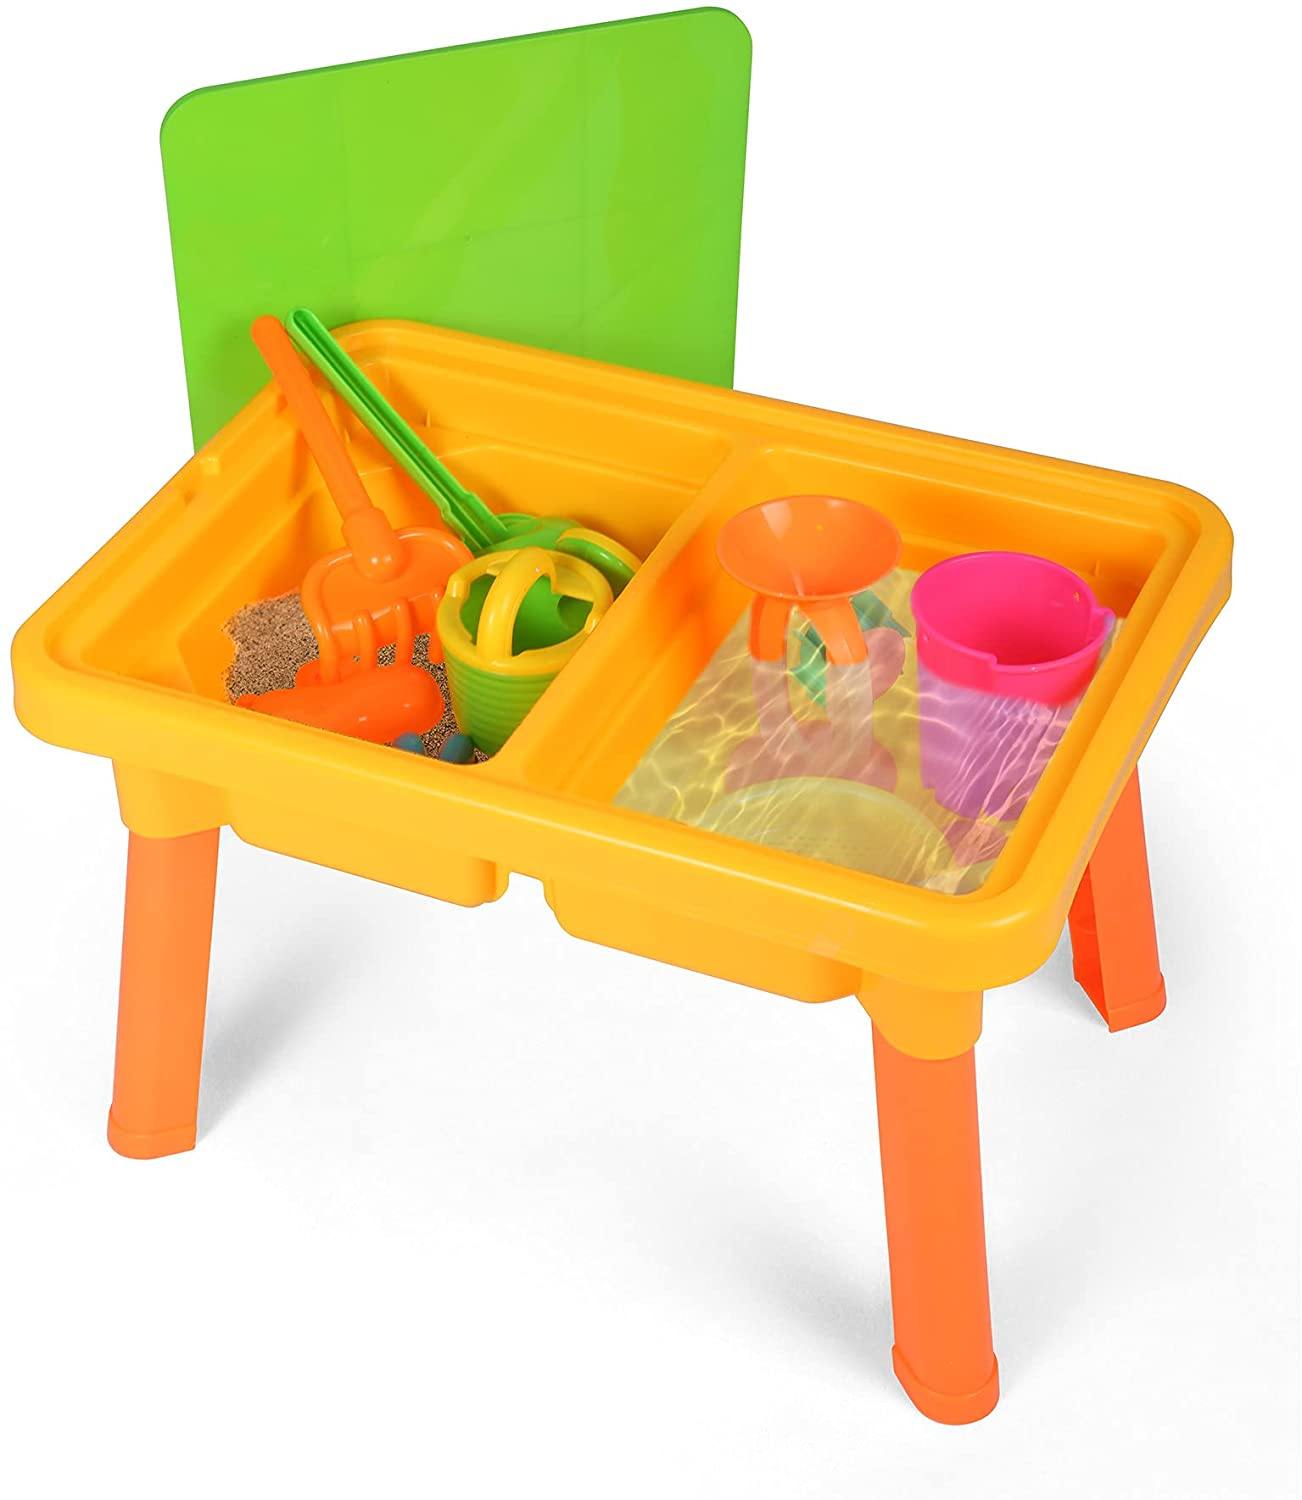 2-in-1 Kids Sand and Water Table + Learning Activity Sensory Table with 8pcs Beach Playset Toddlers Boys Girls Summer Toys - Bosonshop